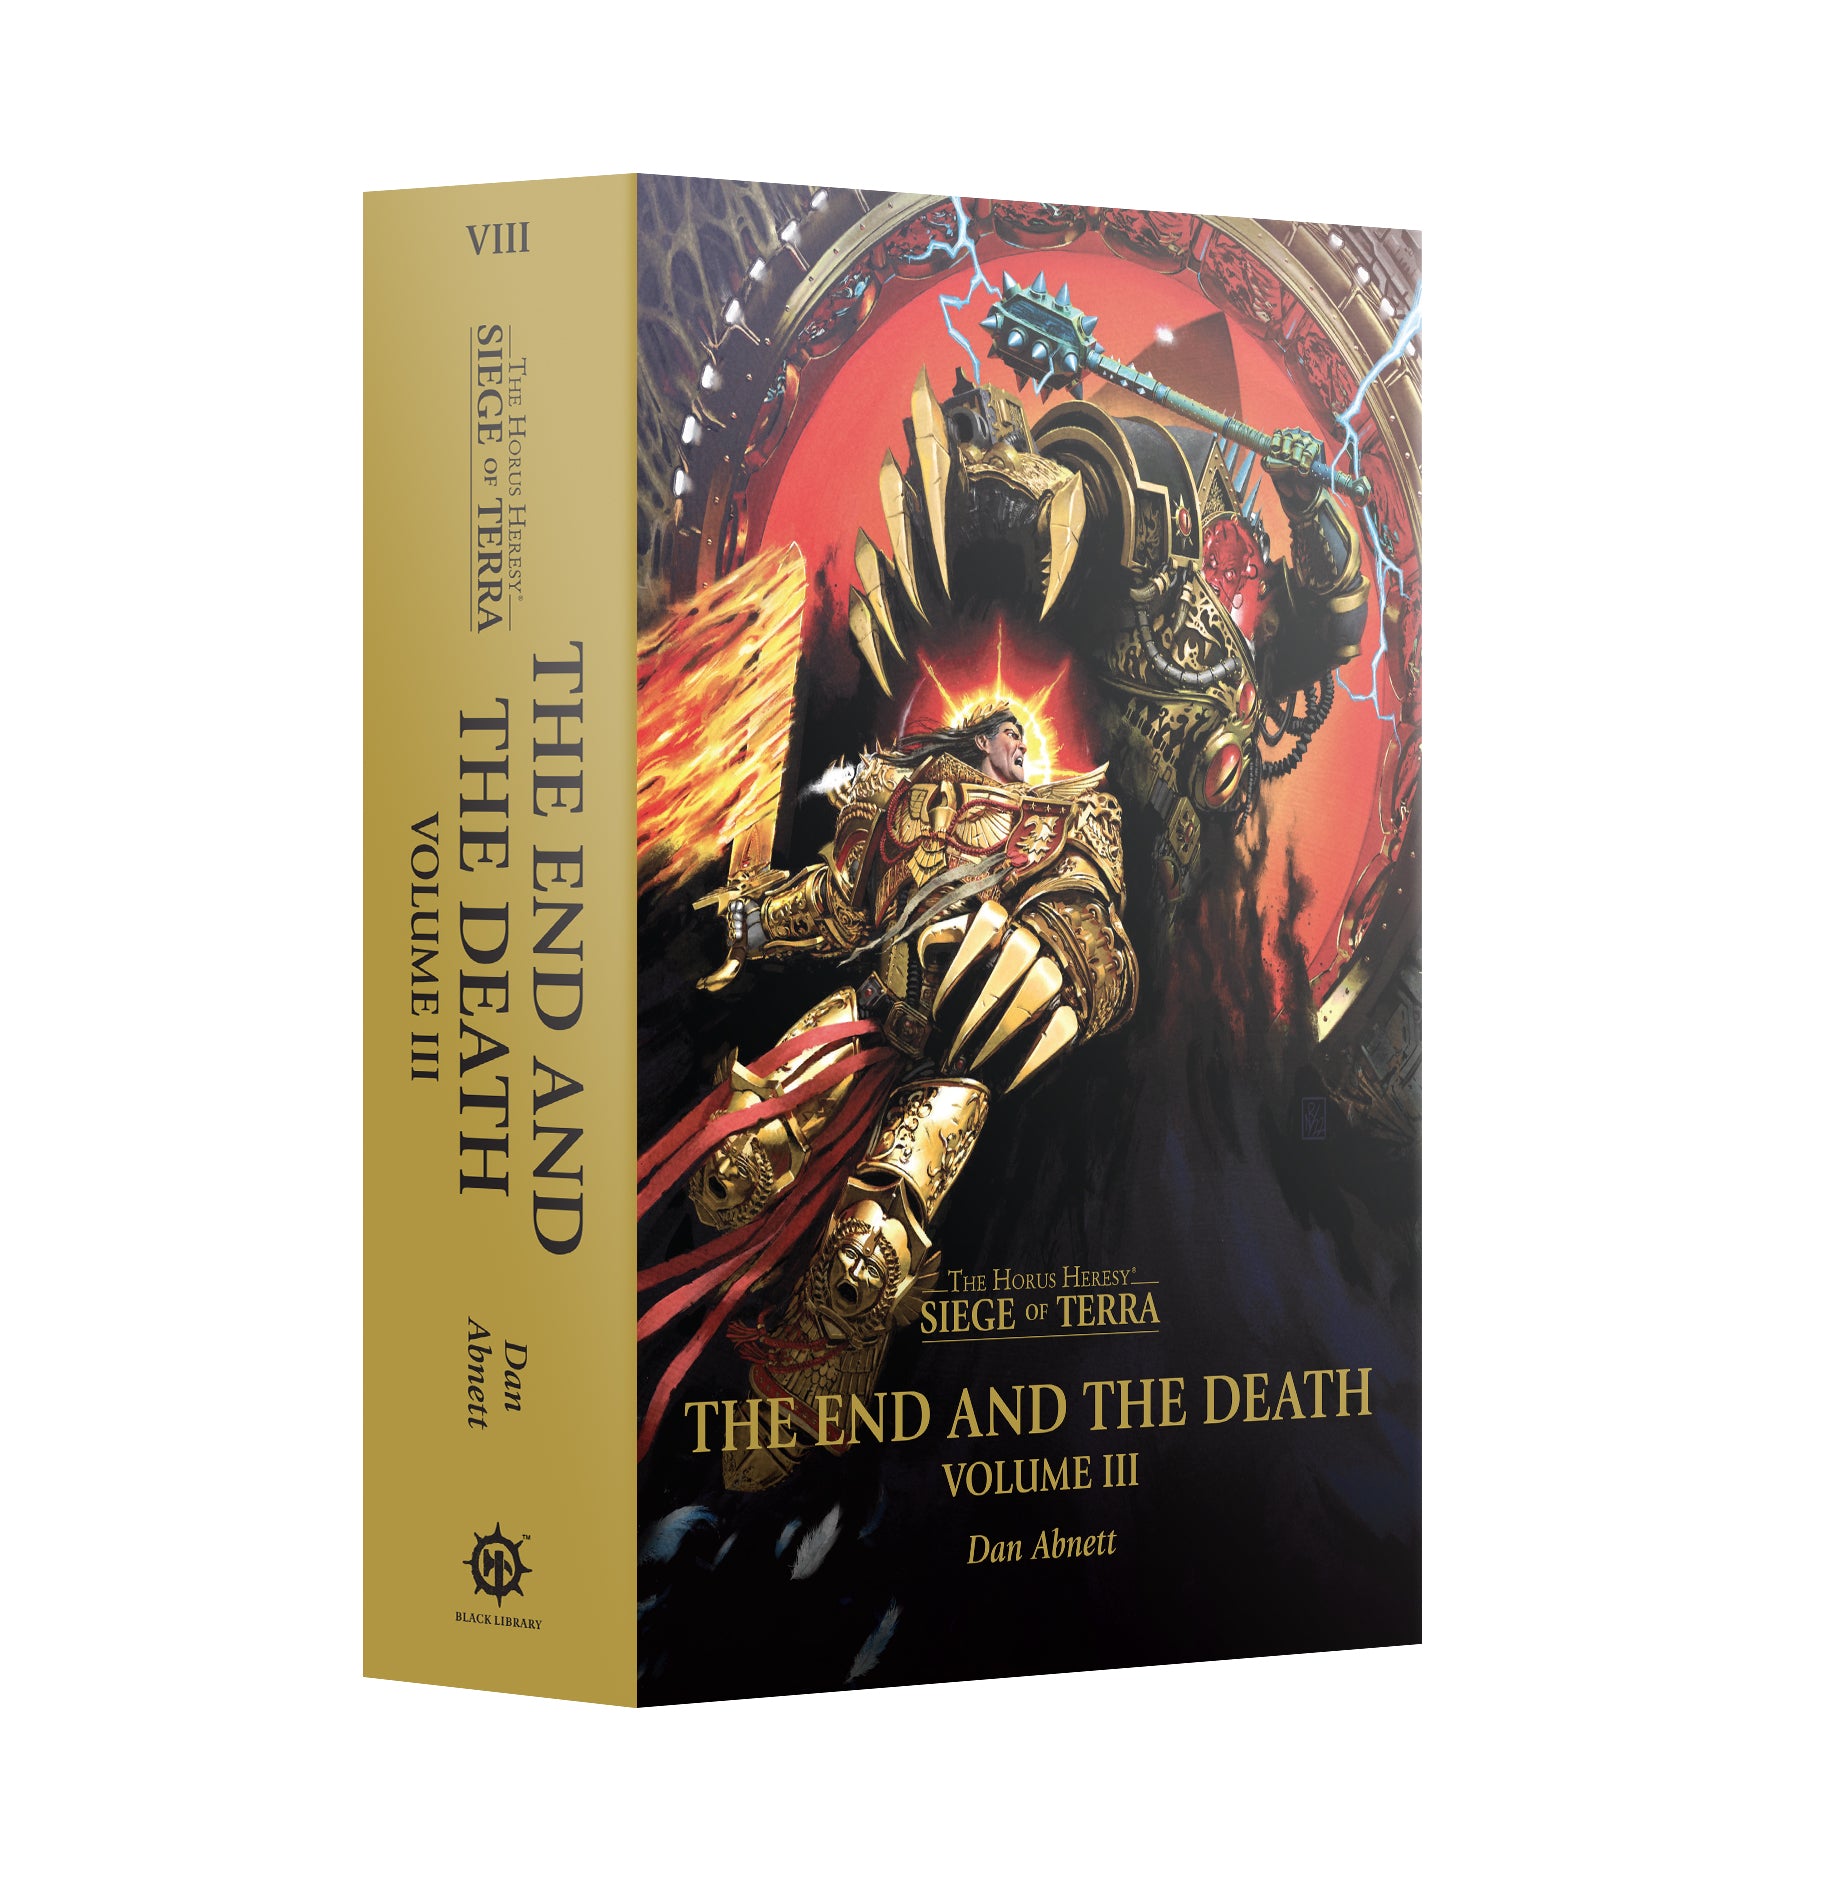 The Horus Heresy: Siege of Terra Book 10: The End and The Death: Vol 3 HB